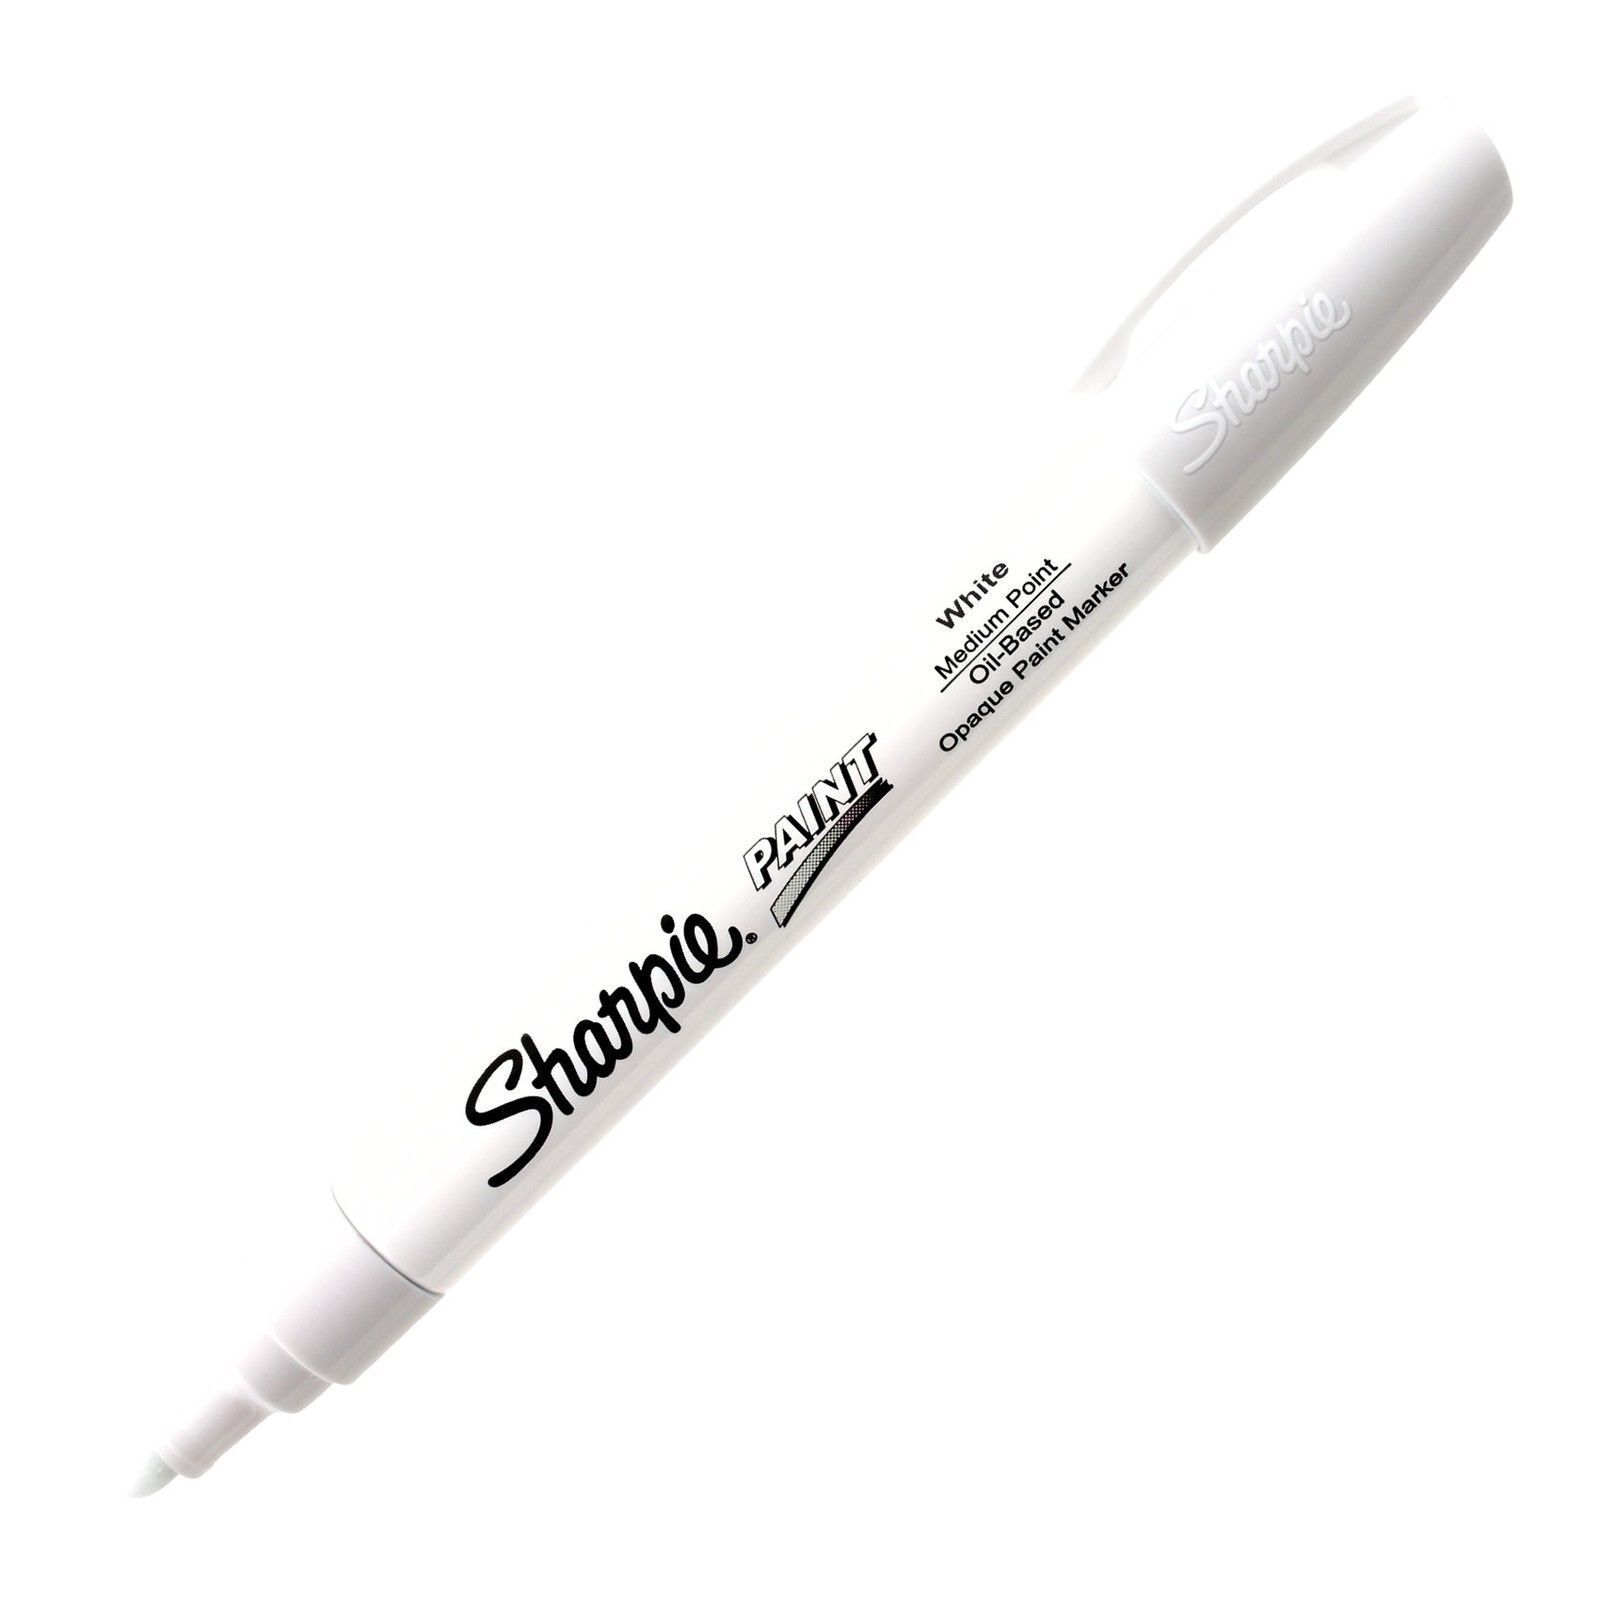 35558 Sharpie New color Oil-Based Paint Marker White Medium Tip Ink Many popular brands Pac